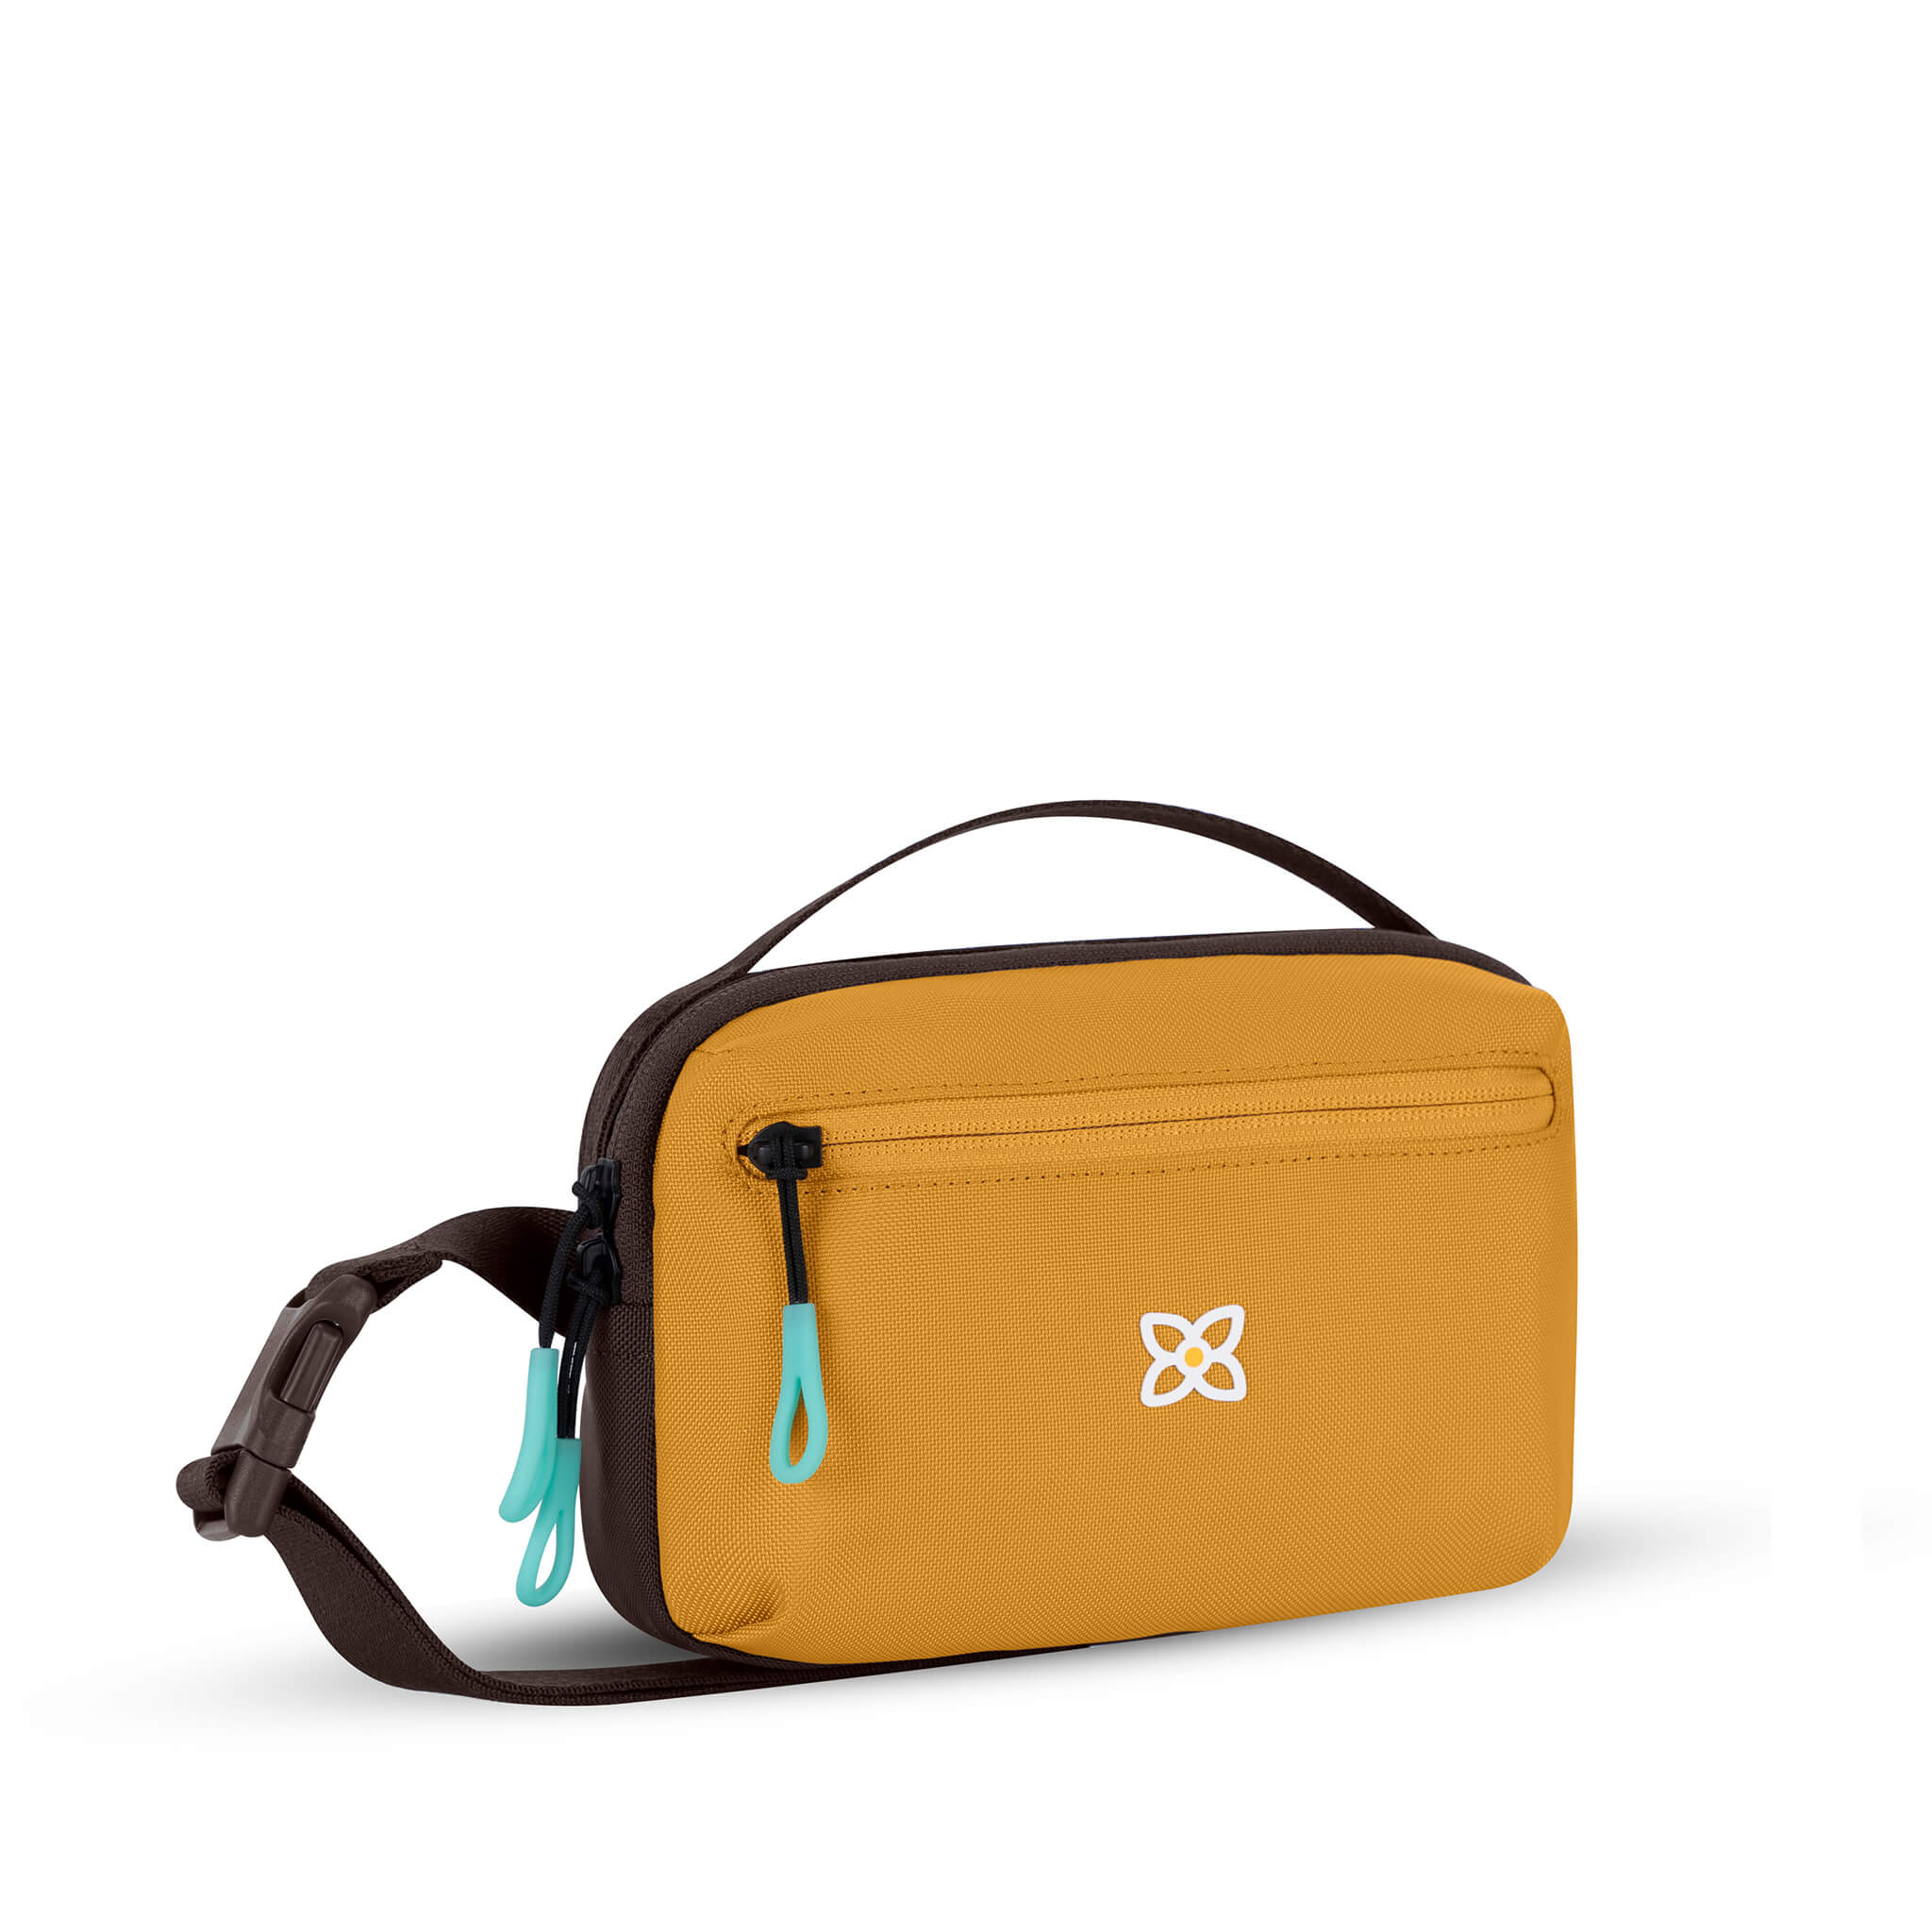 Angled front view of Sherpani hip pack, the Hyk in Sundial. Hyk features include an adjustable waist strap, two external zipper pockets, an internal zipper pocket and RFID-blocking technology to block cyber theft. The Sundial color is yellow with turquoise accents.